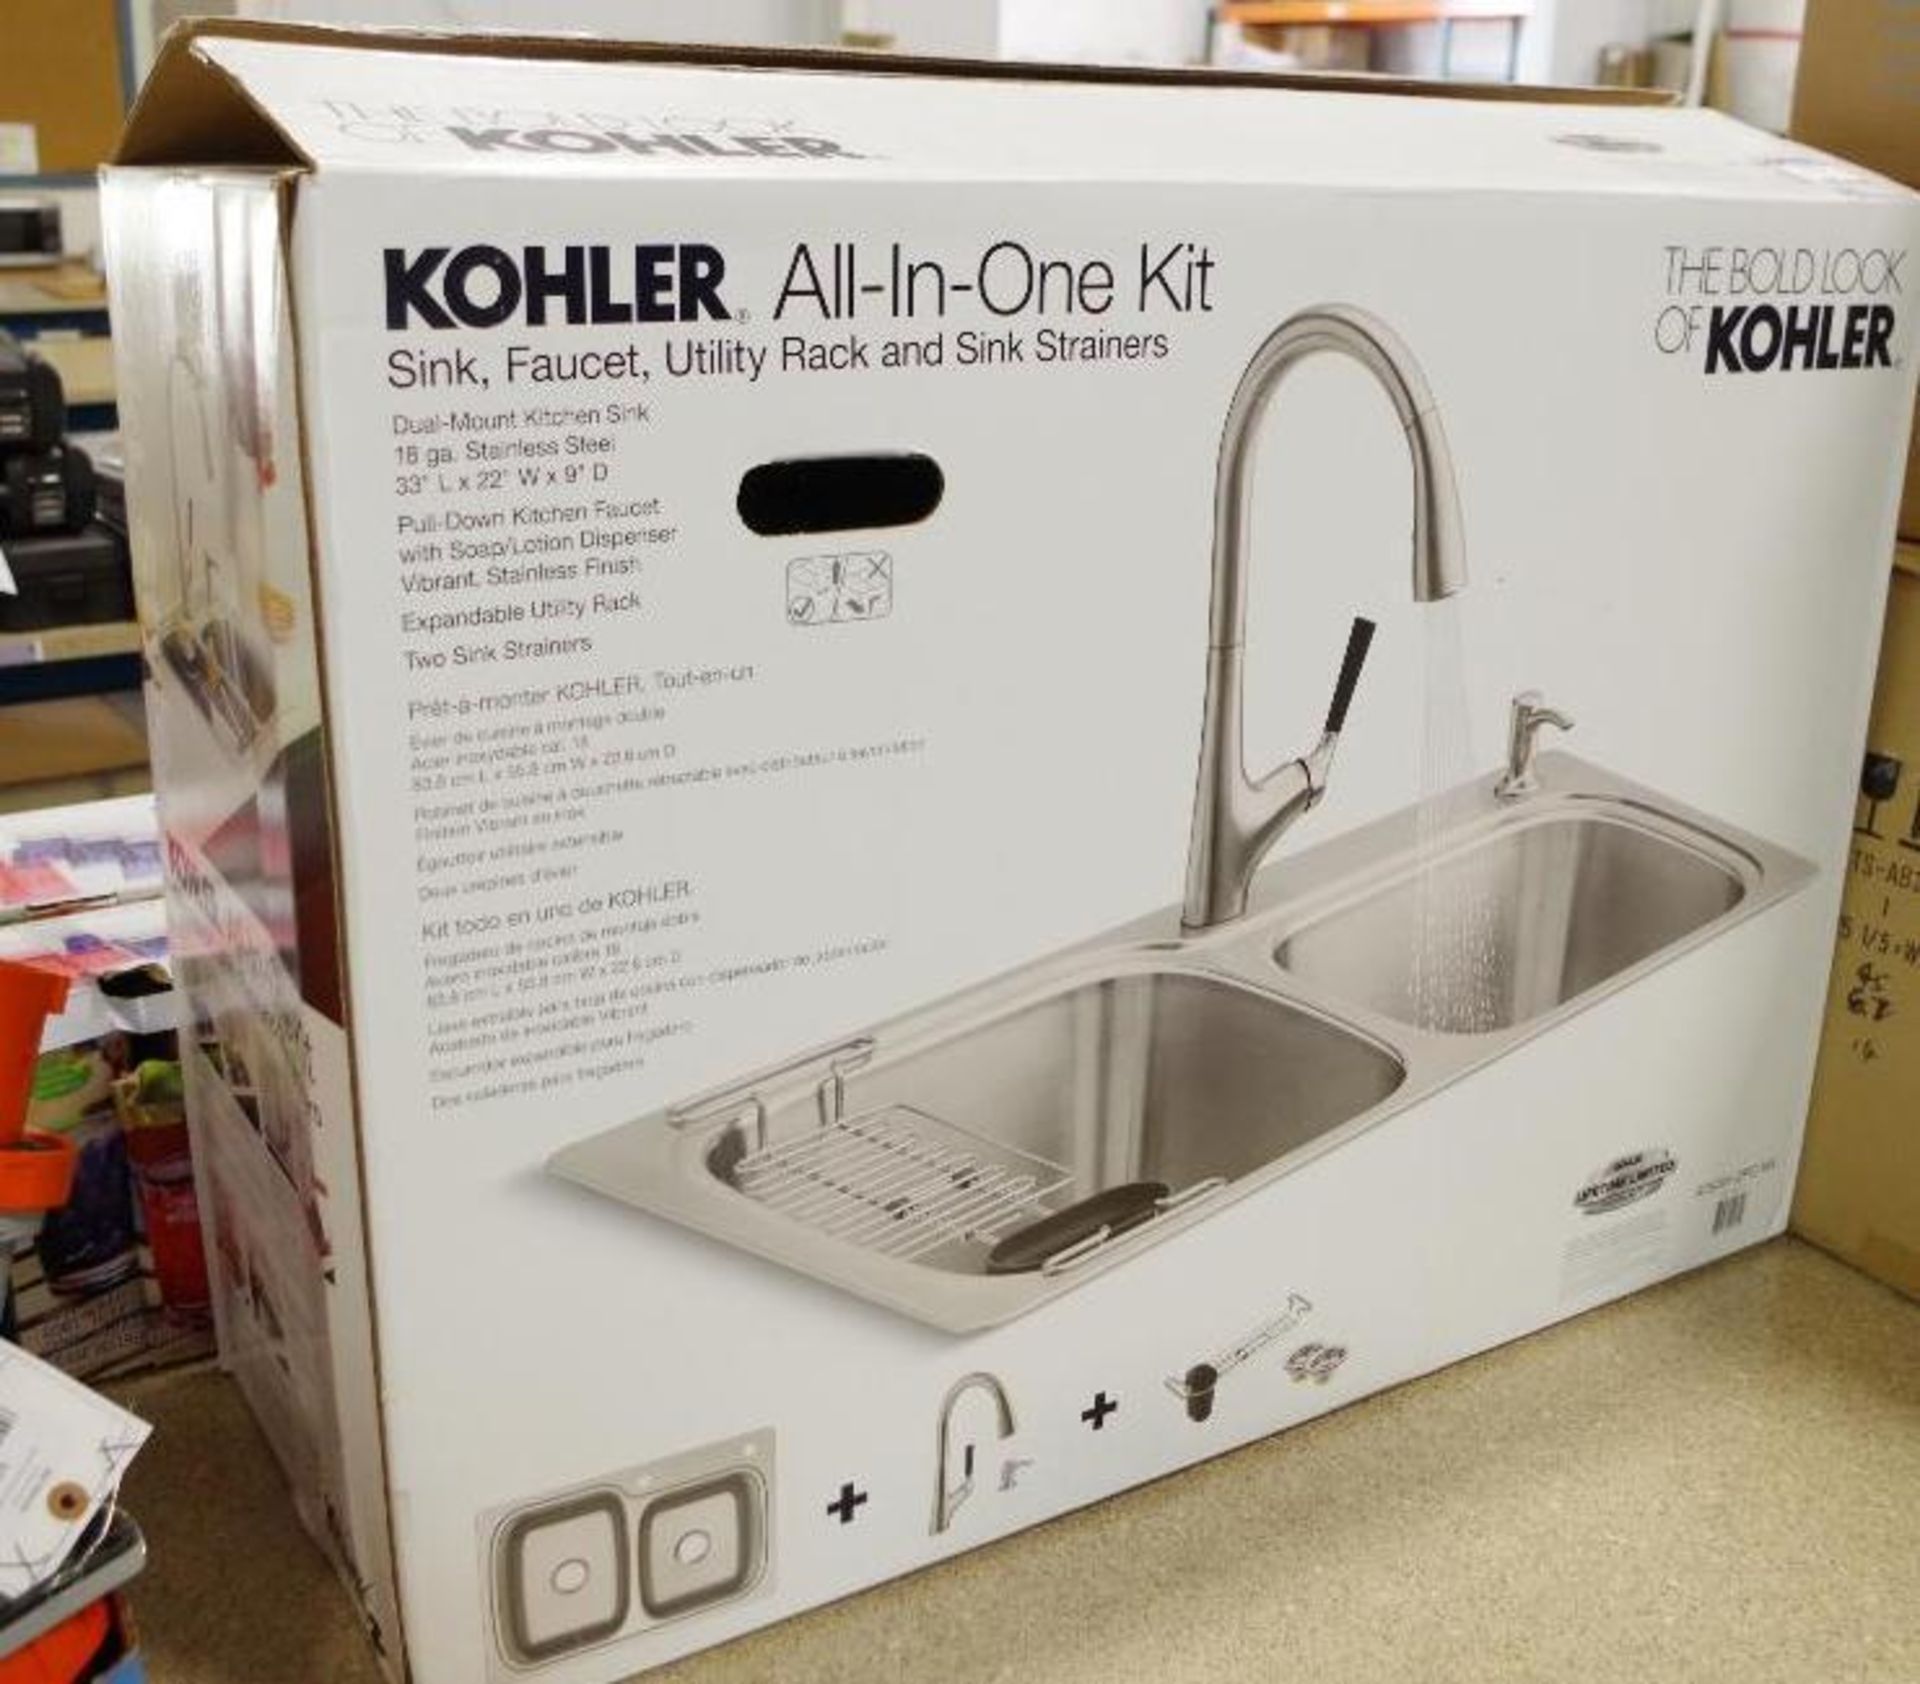 KOHLER All-In-One Kit, Stainless Steel Sink, Faucet, Utility Rack and Sink Strainers - Image 2 of 2